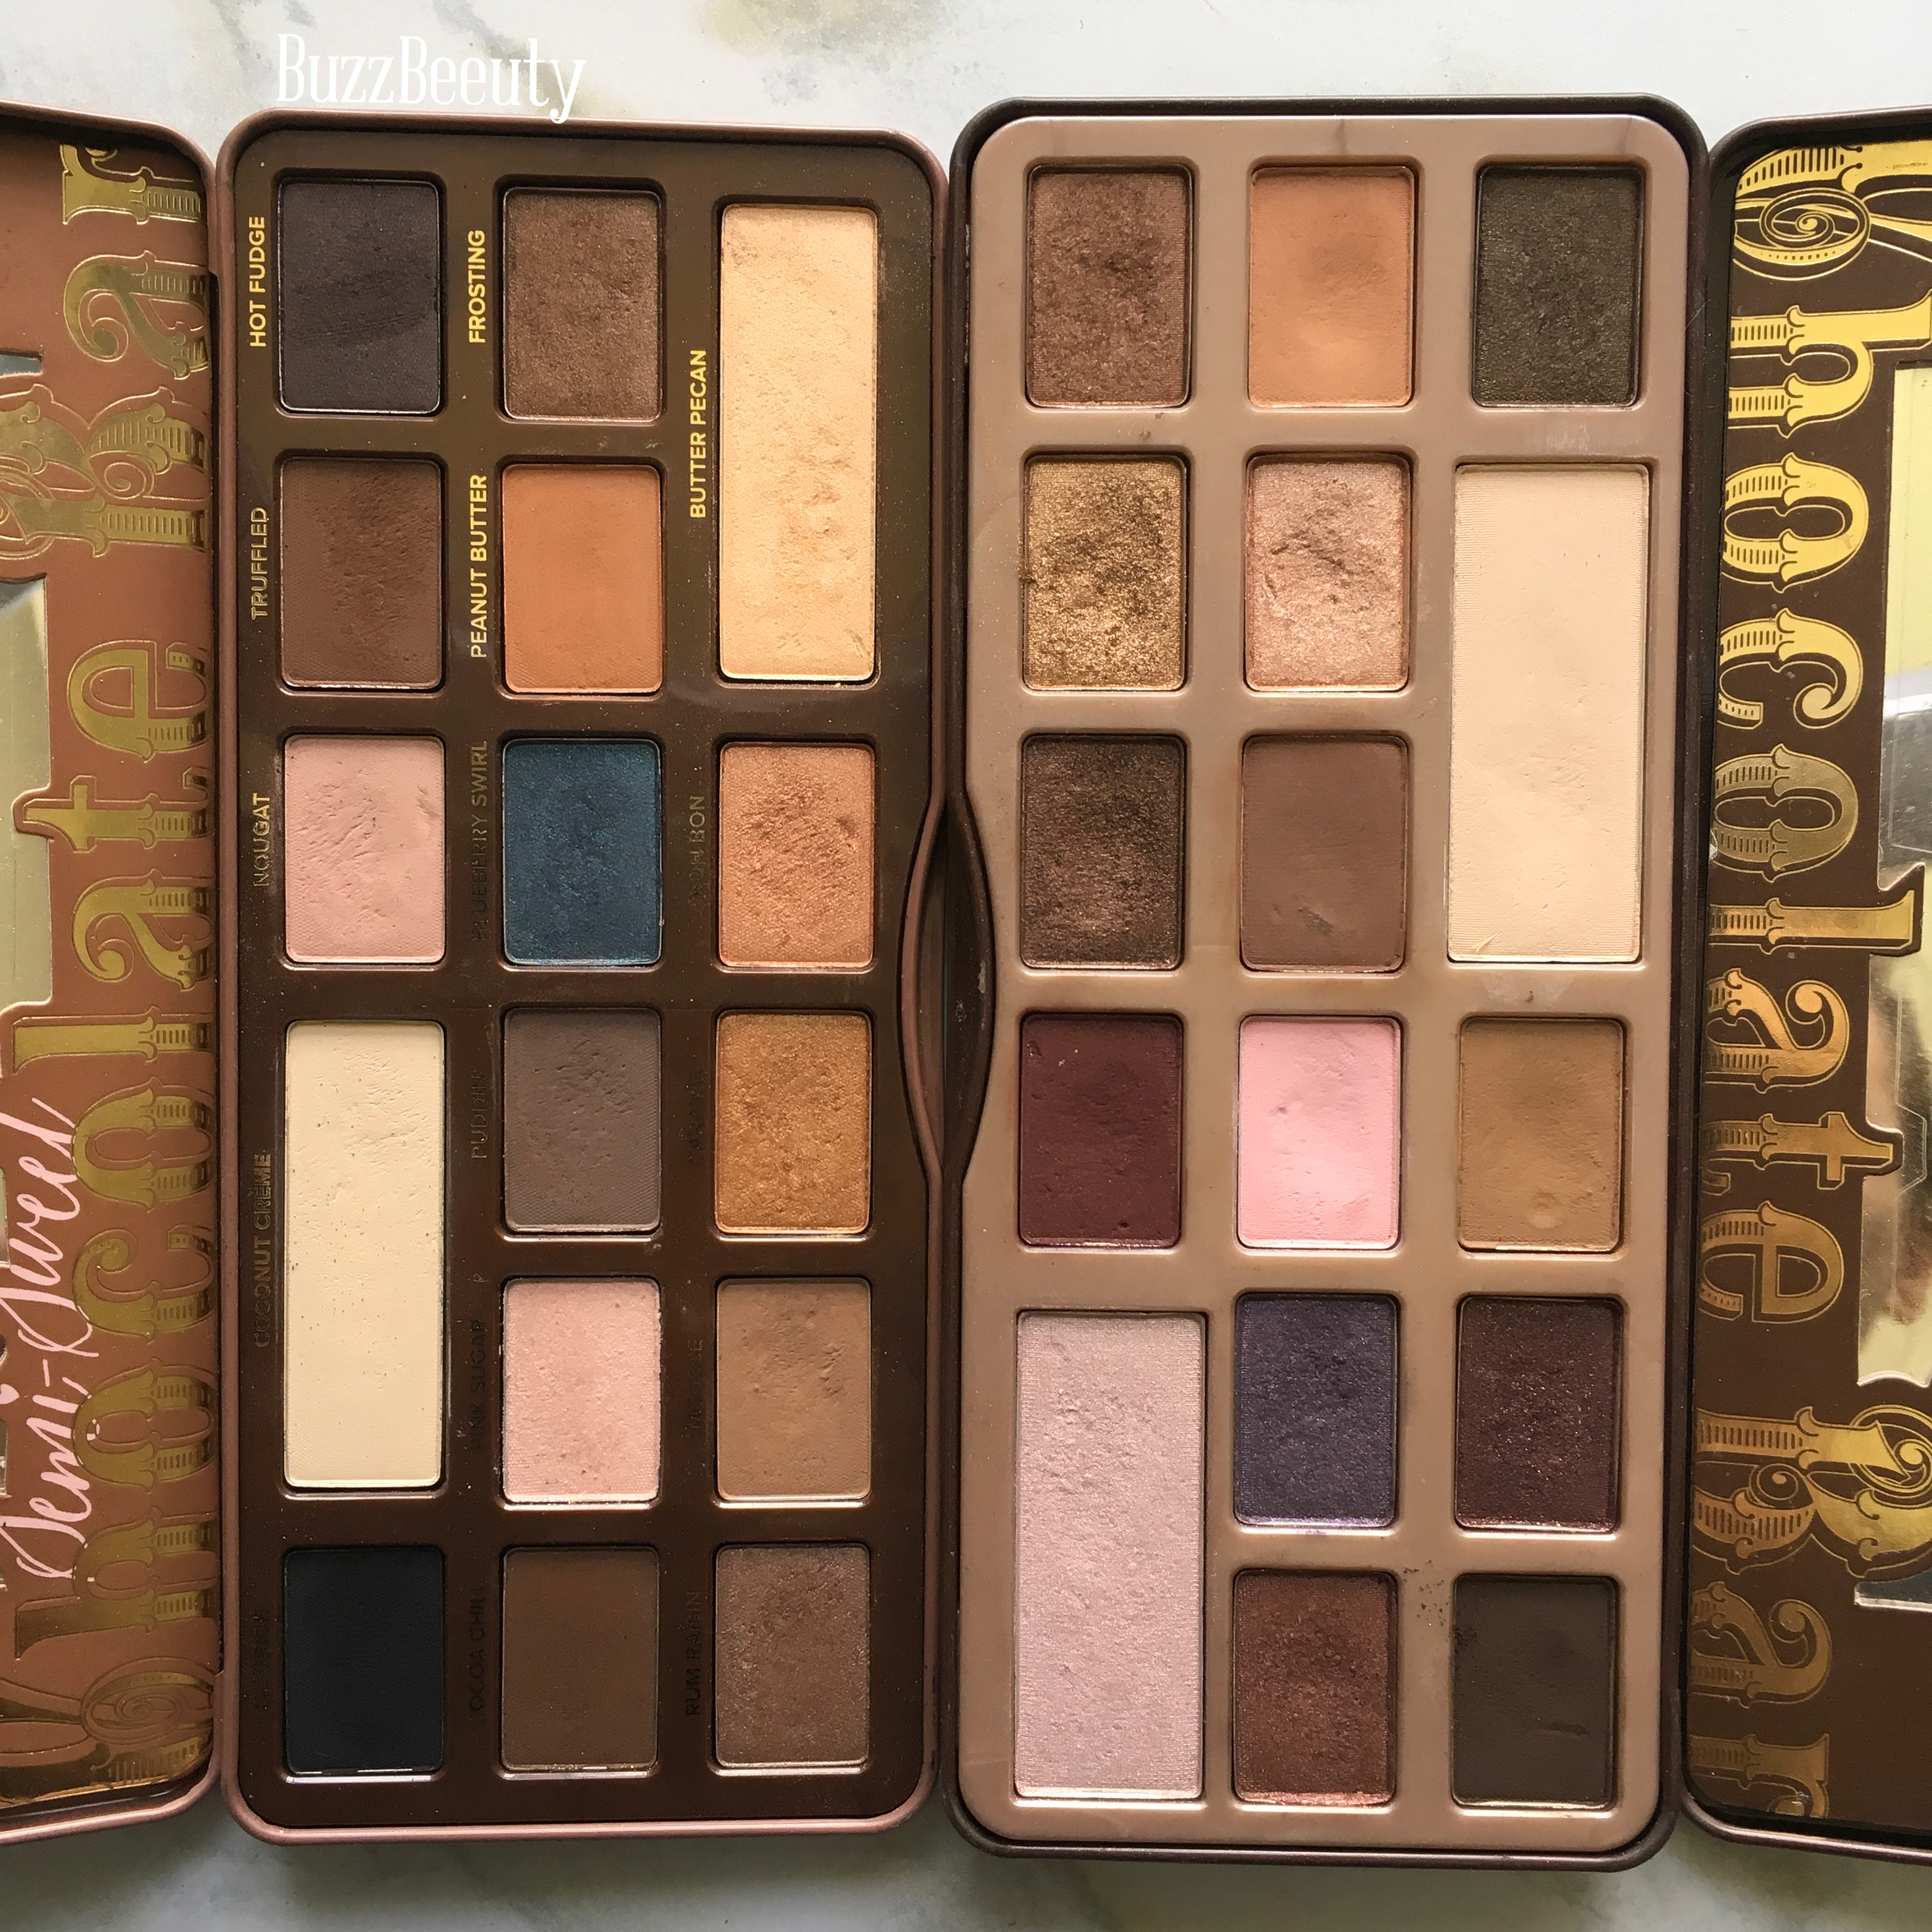 Blossom transfusion Garanti BuzzBeeuty - Too Faced Original Chocolate Bar Palette Review, Swatches, and  Eye Looks